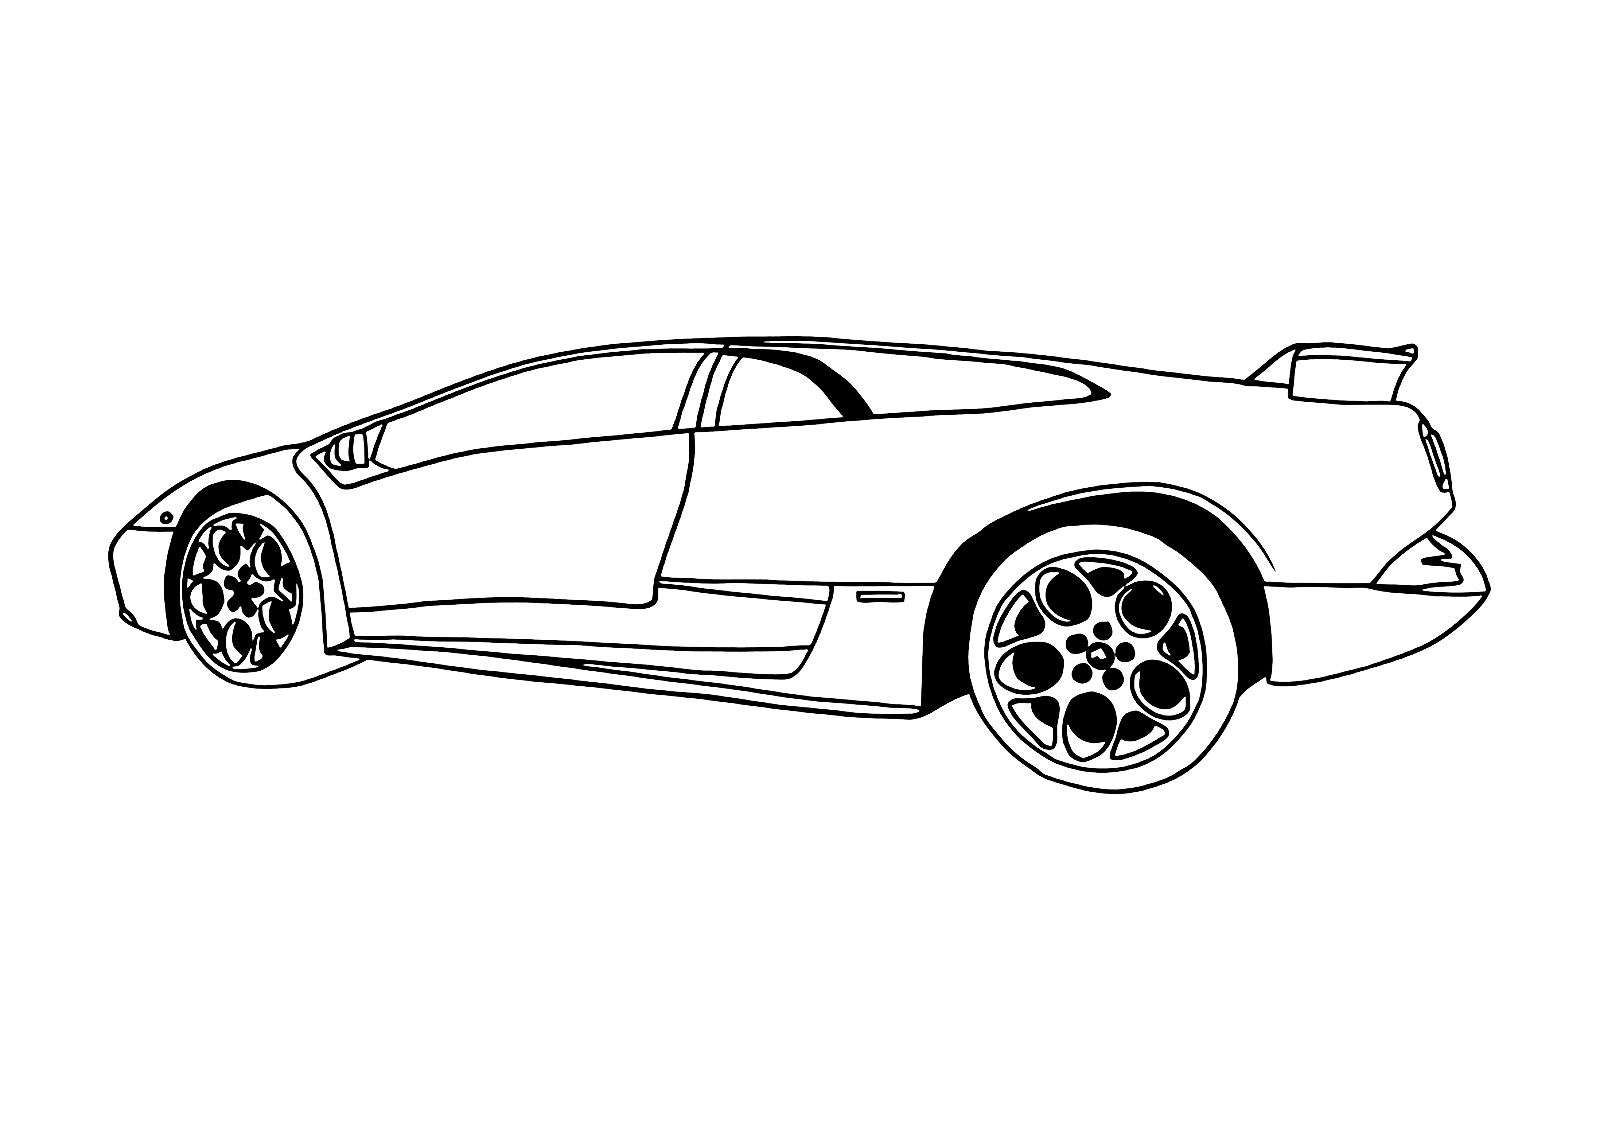 Lamborghini Coloring Pages to download and print for free